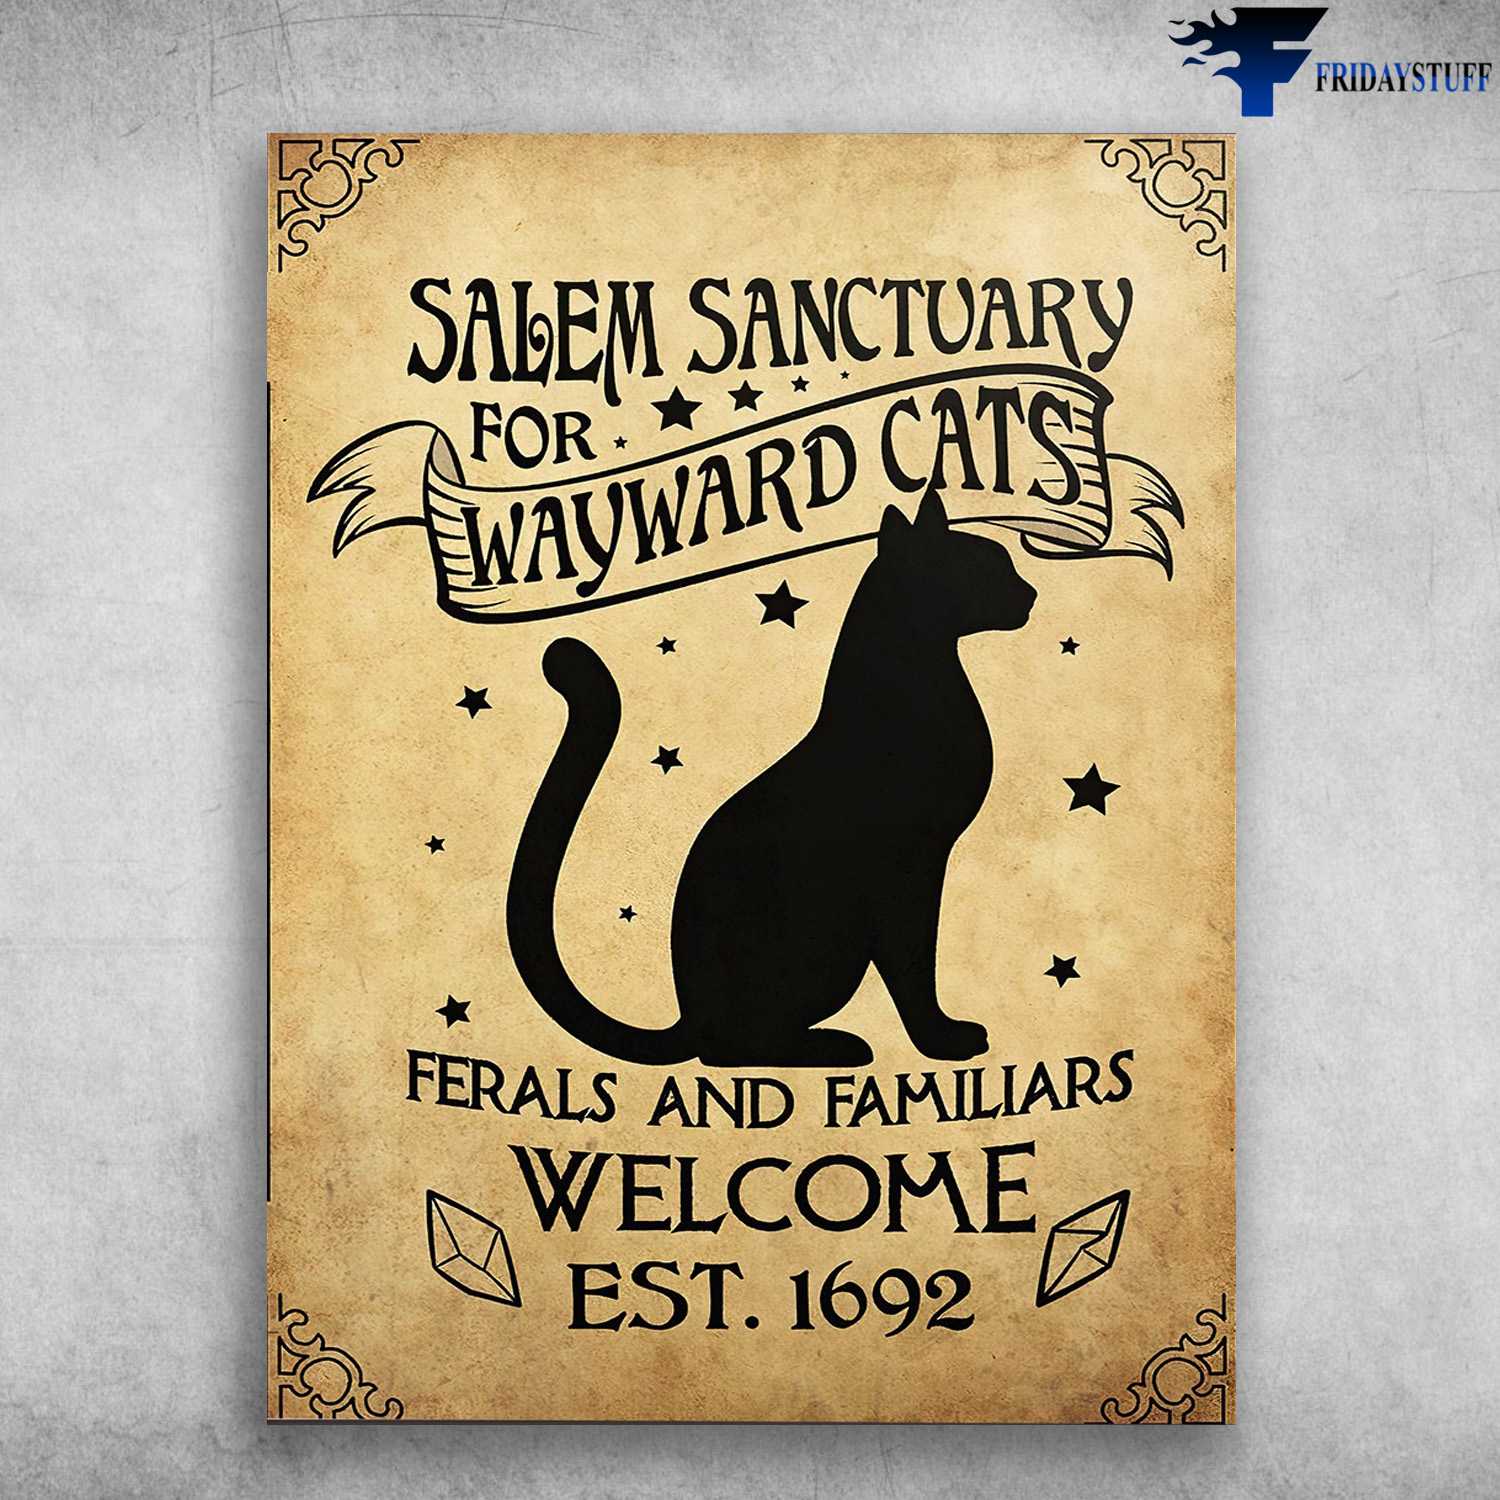 Black Cat, Halloween Cat - Salem Sanctuary For Wayward Cats, Ferals And Familiars, Welcome